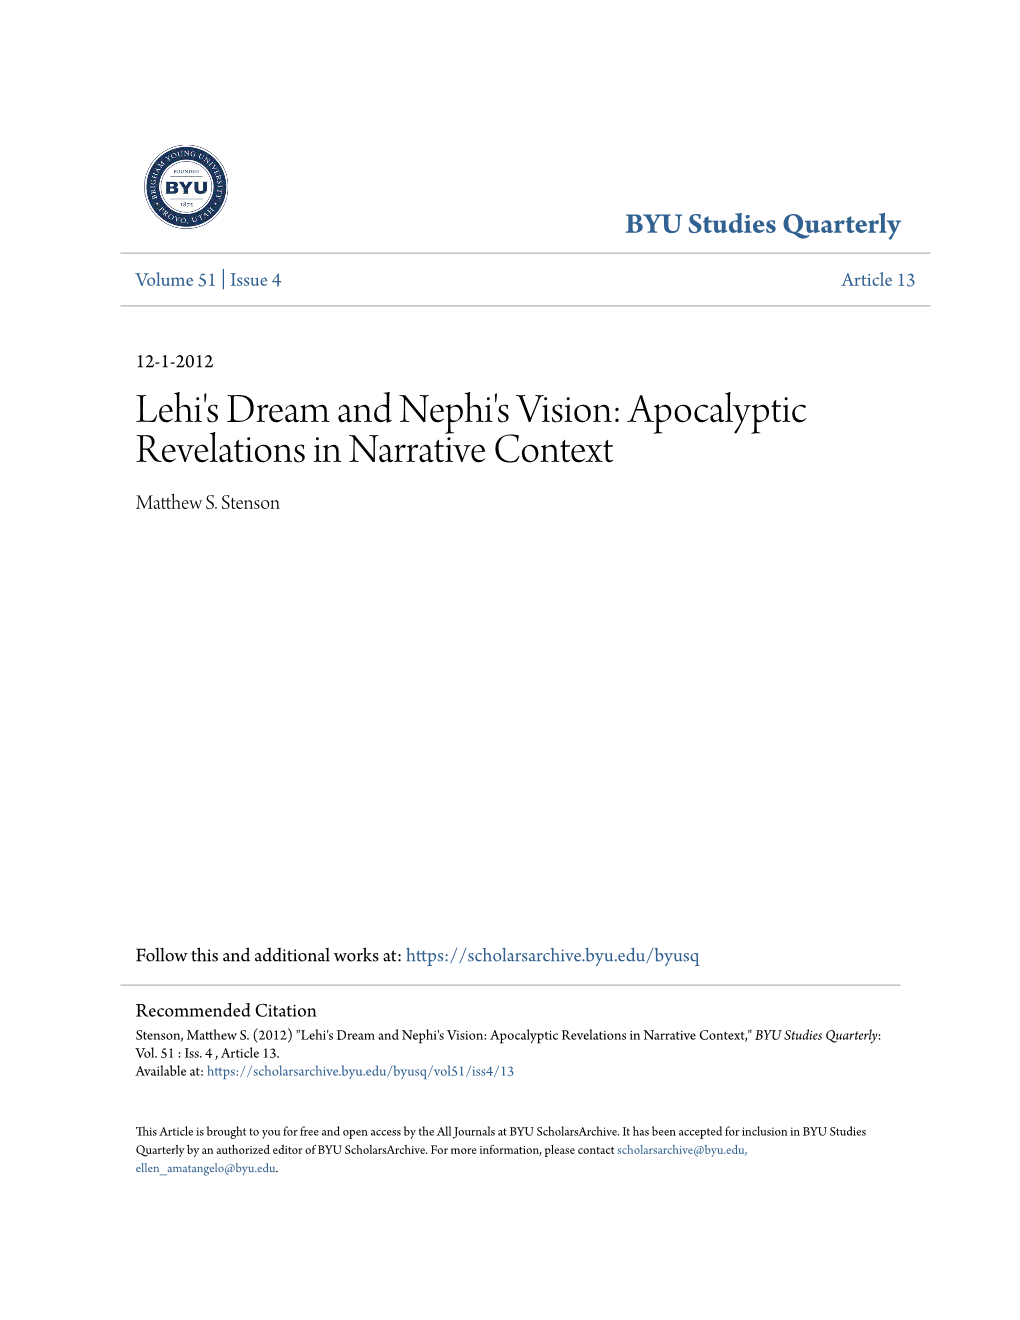 Lehi's Dream and Nephi's Vision: Apocalyptic Revelations in Narrative Context Matthew .S Stenson